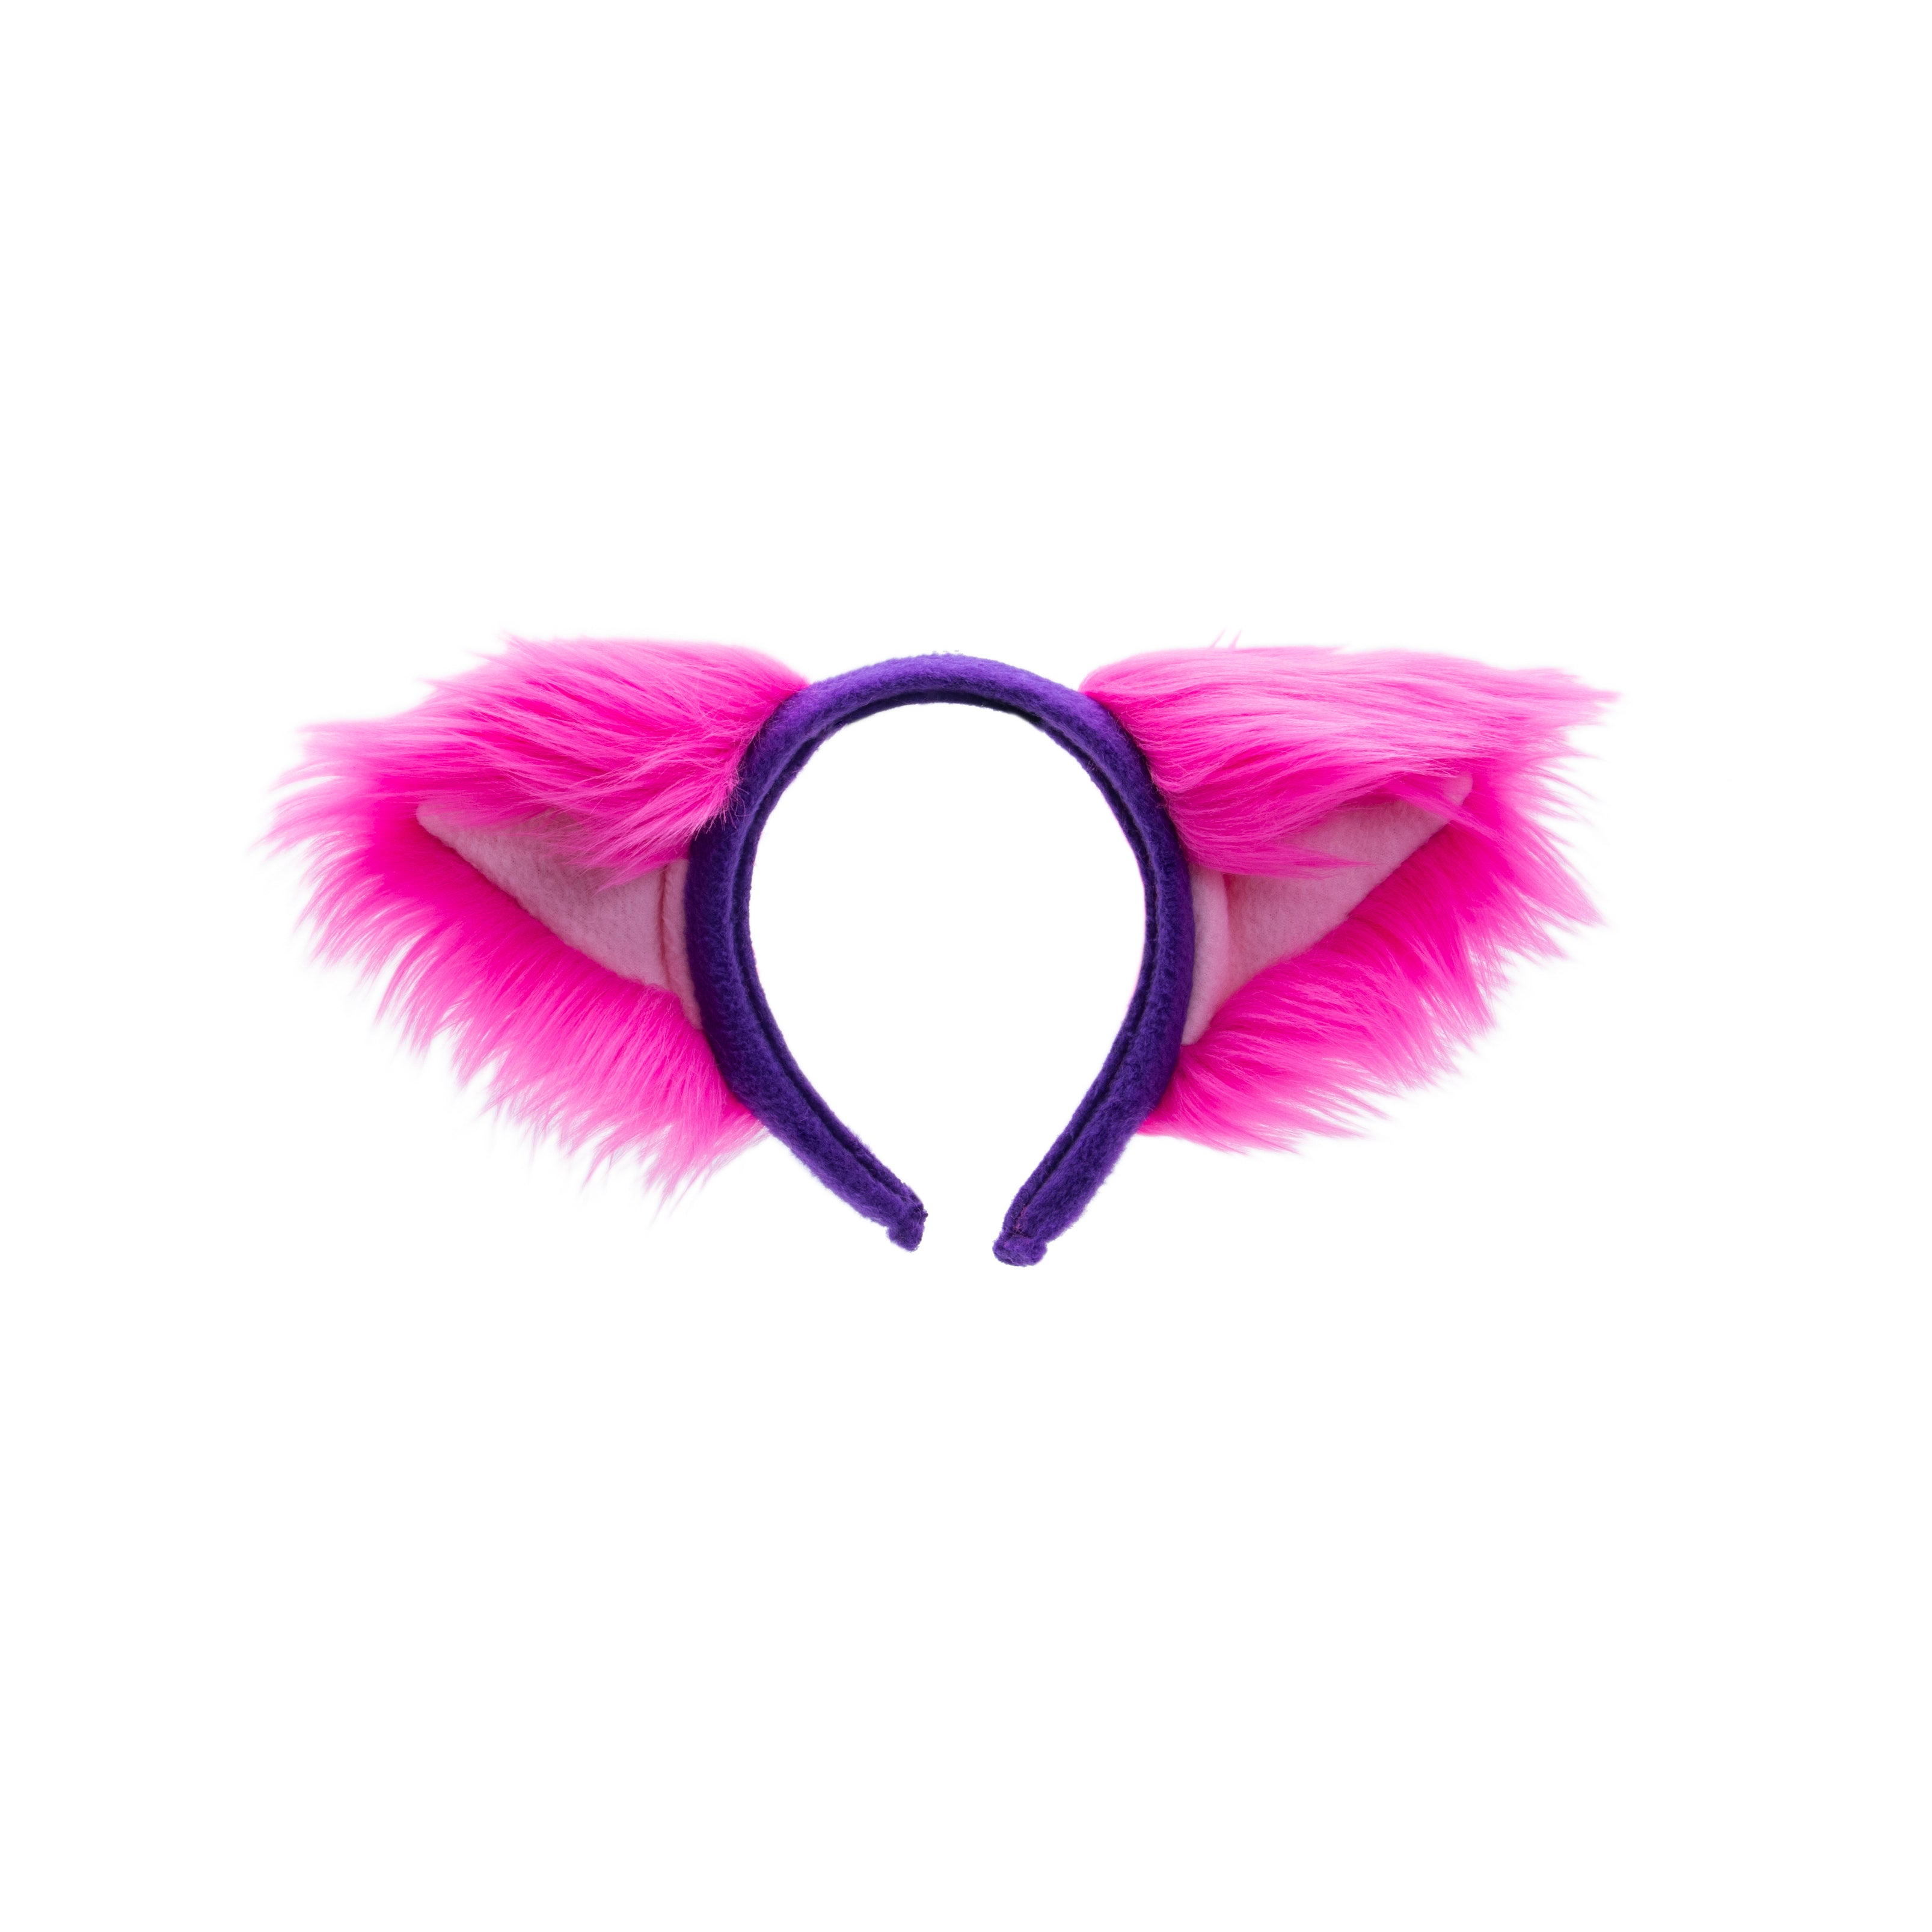 Pawstar Cheshire Fluffy Mew Ear Headband furry fluffy partial fursuit halloween costume or cosplay alice in wonderland accessory classic pink and purple